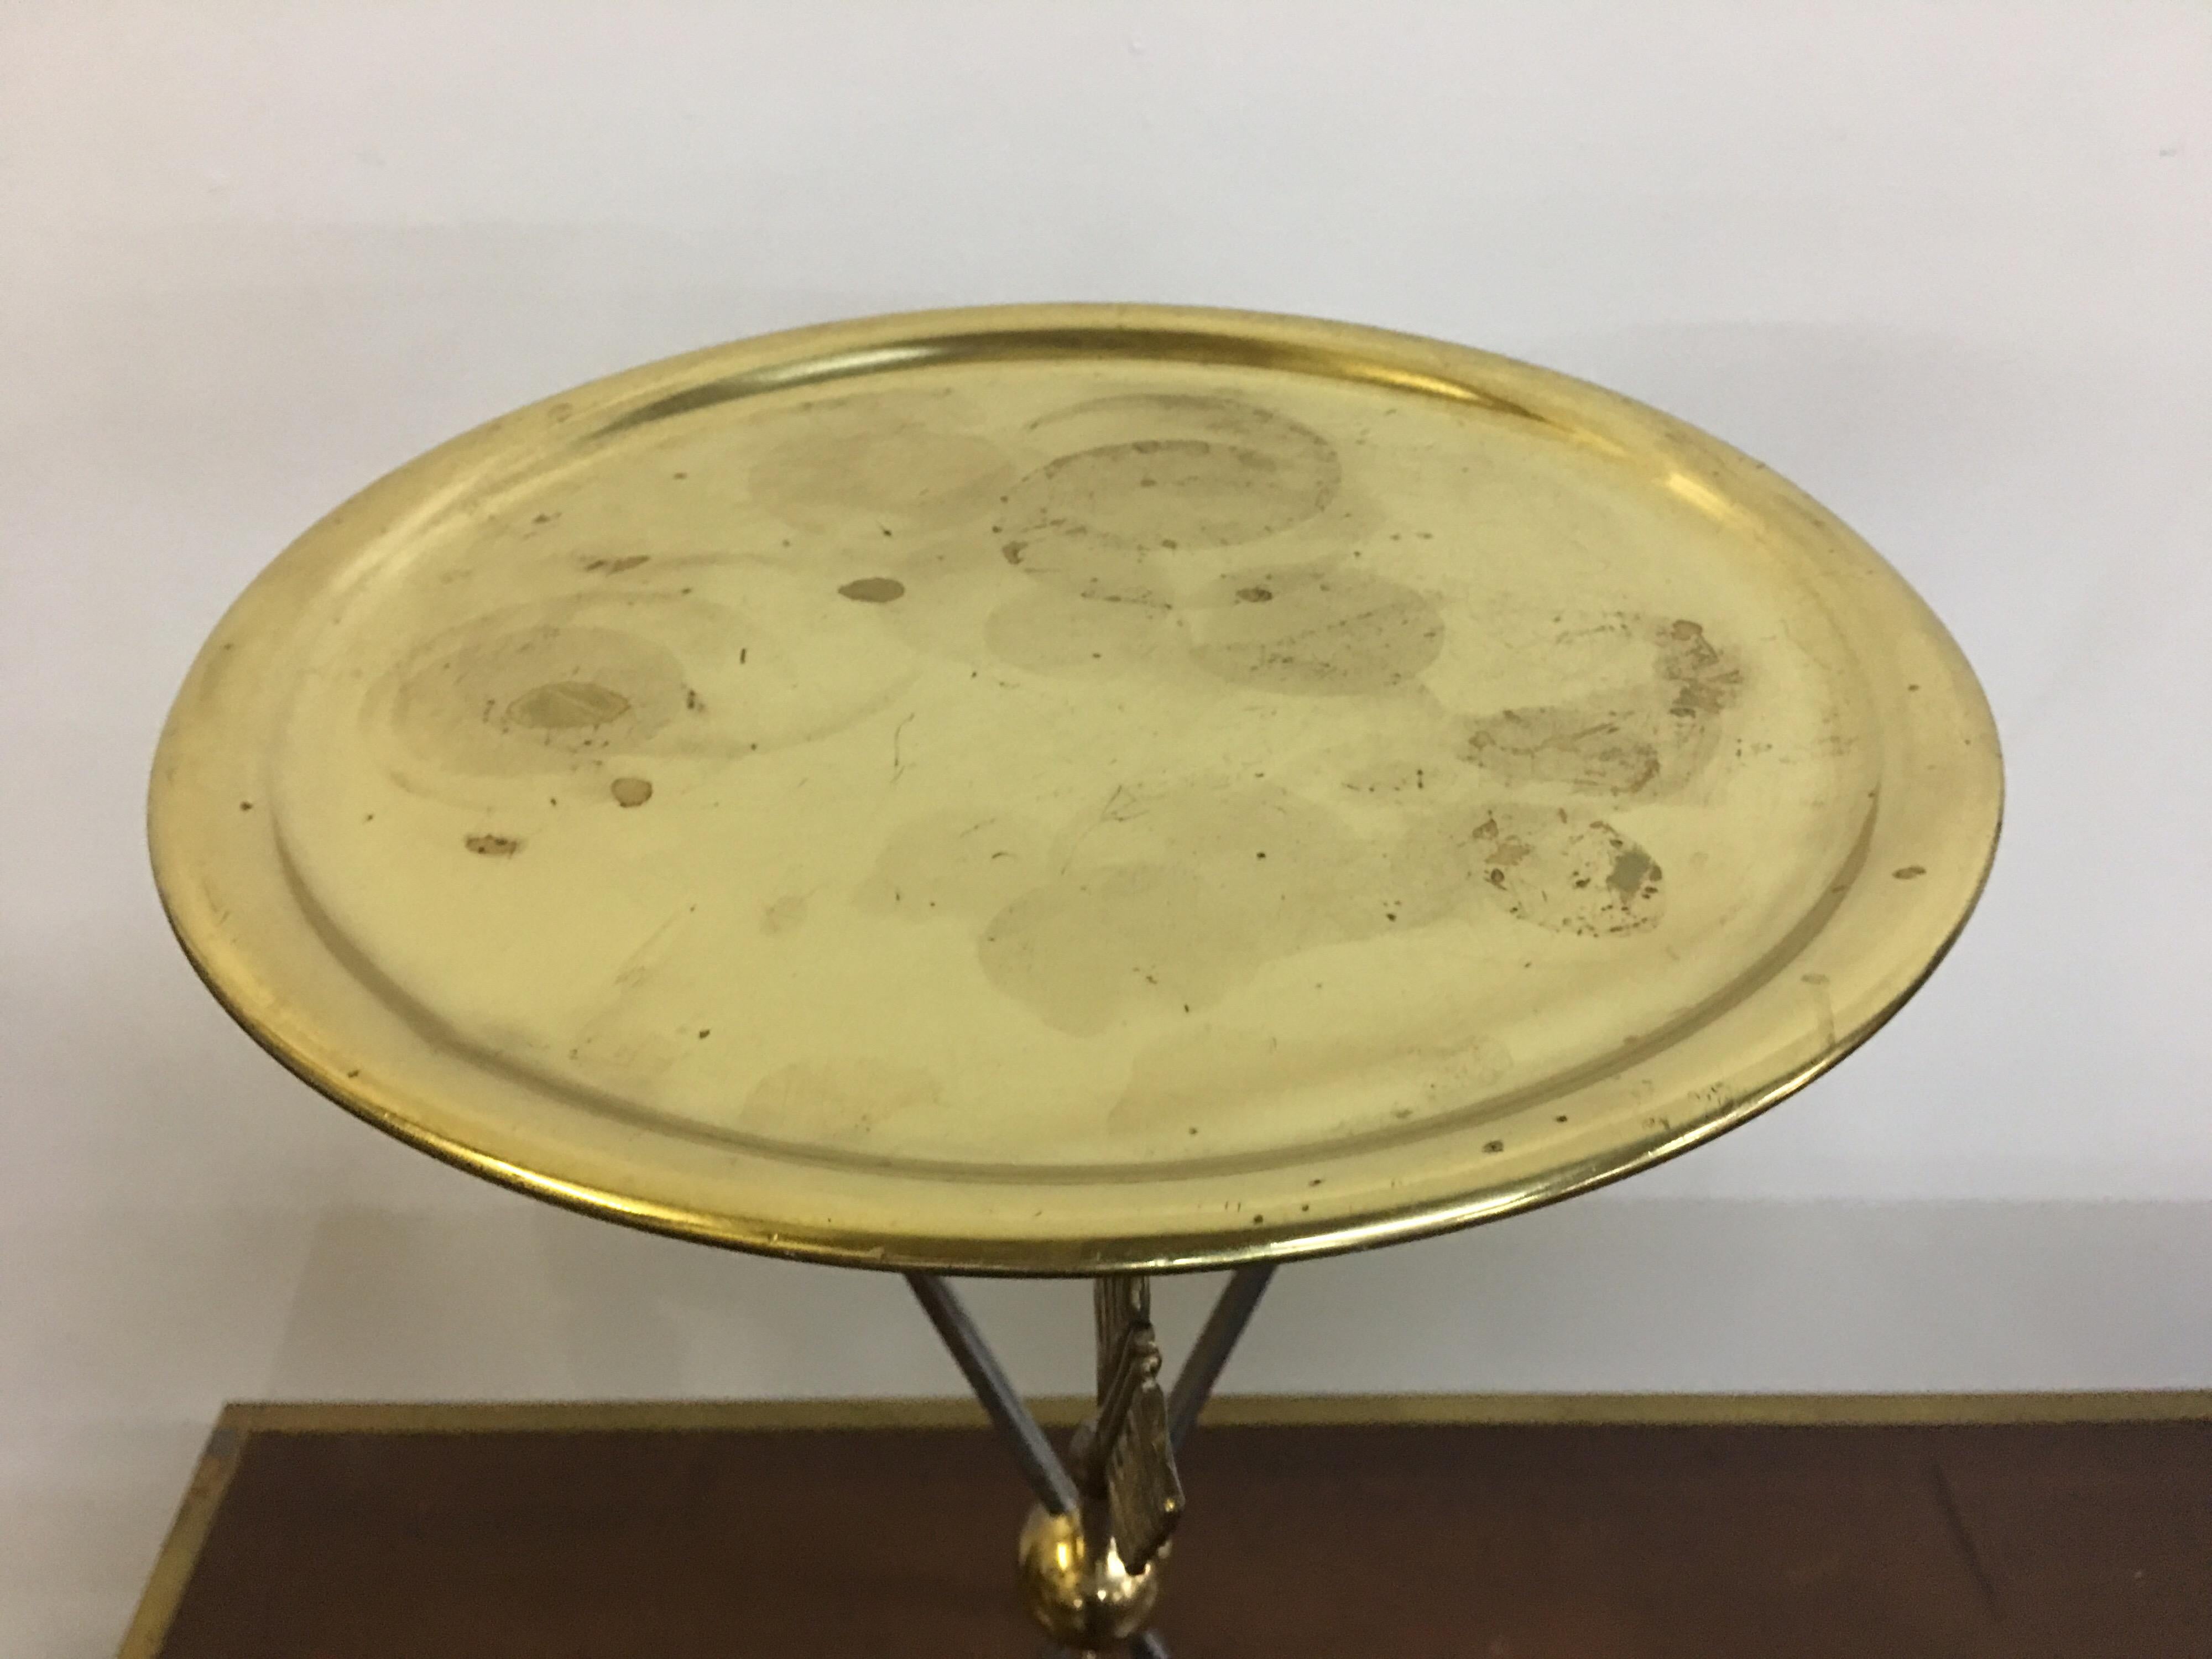 Classical French design with brass and metal, the brass trays are removable. Arrows create the base and are very sturdy.